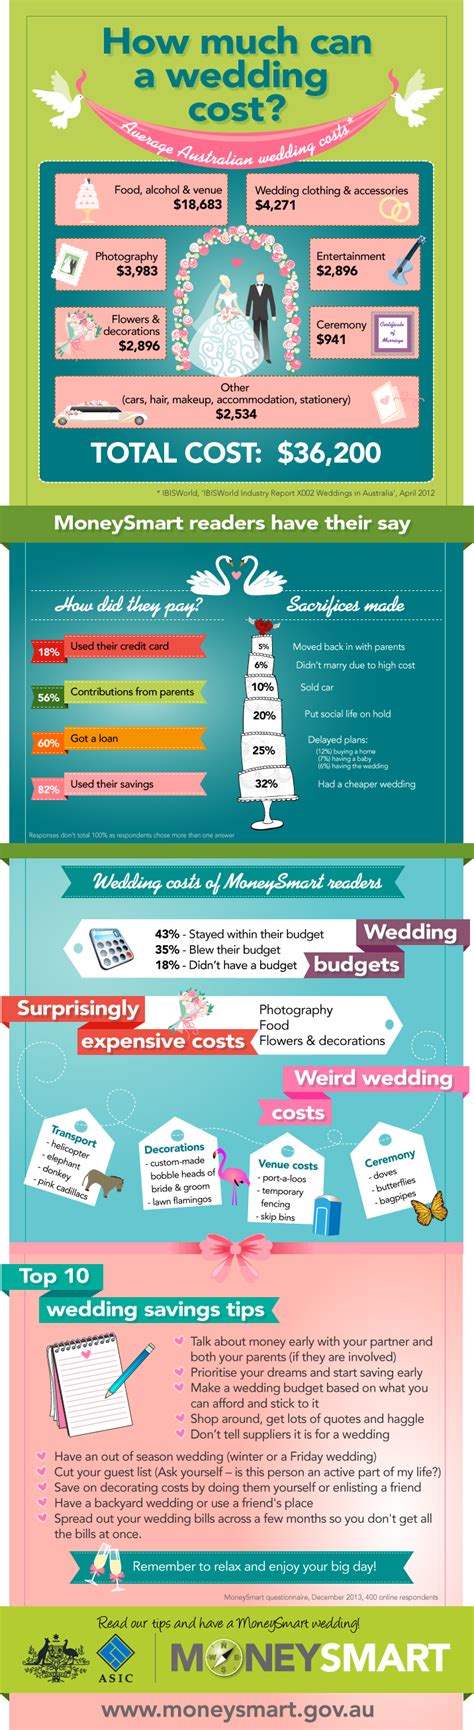 Average wedding costs in nc. How much can a wedding cost? | MoneySmart by ASIC | Wedding budget planner, Wedding costs ...